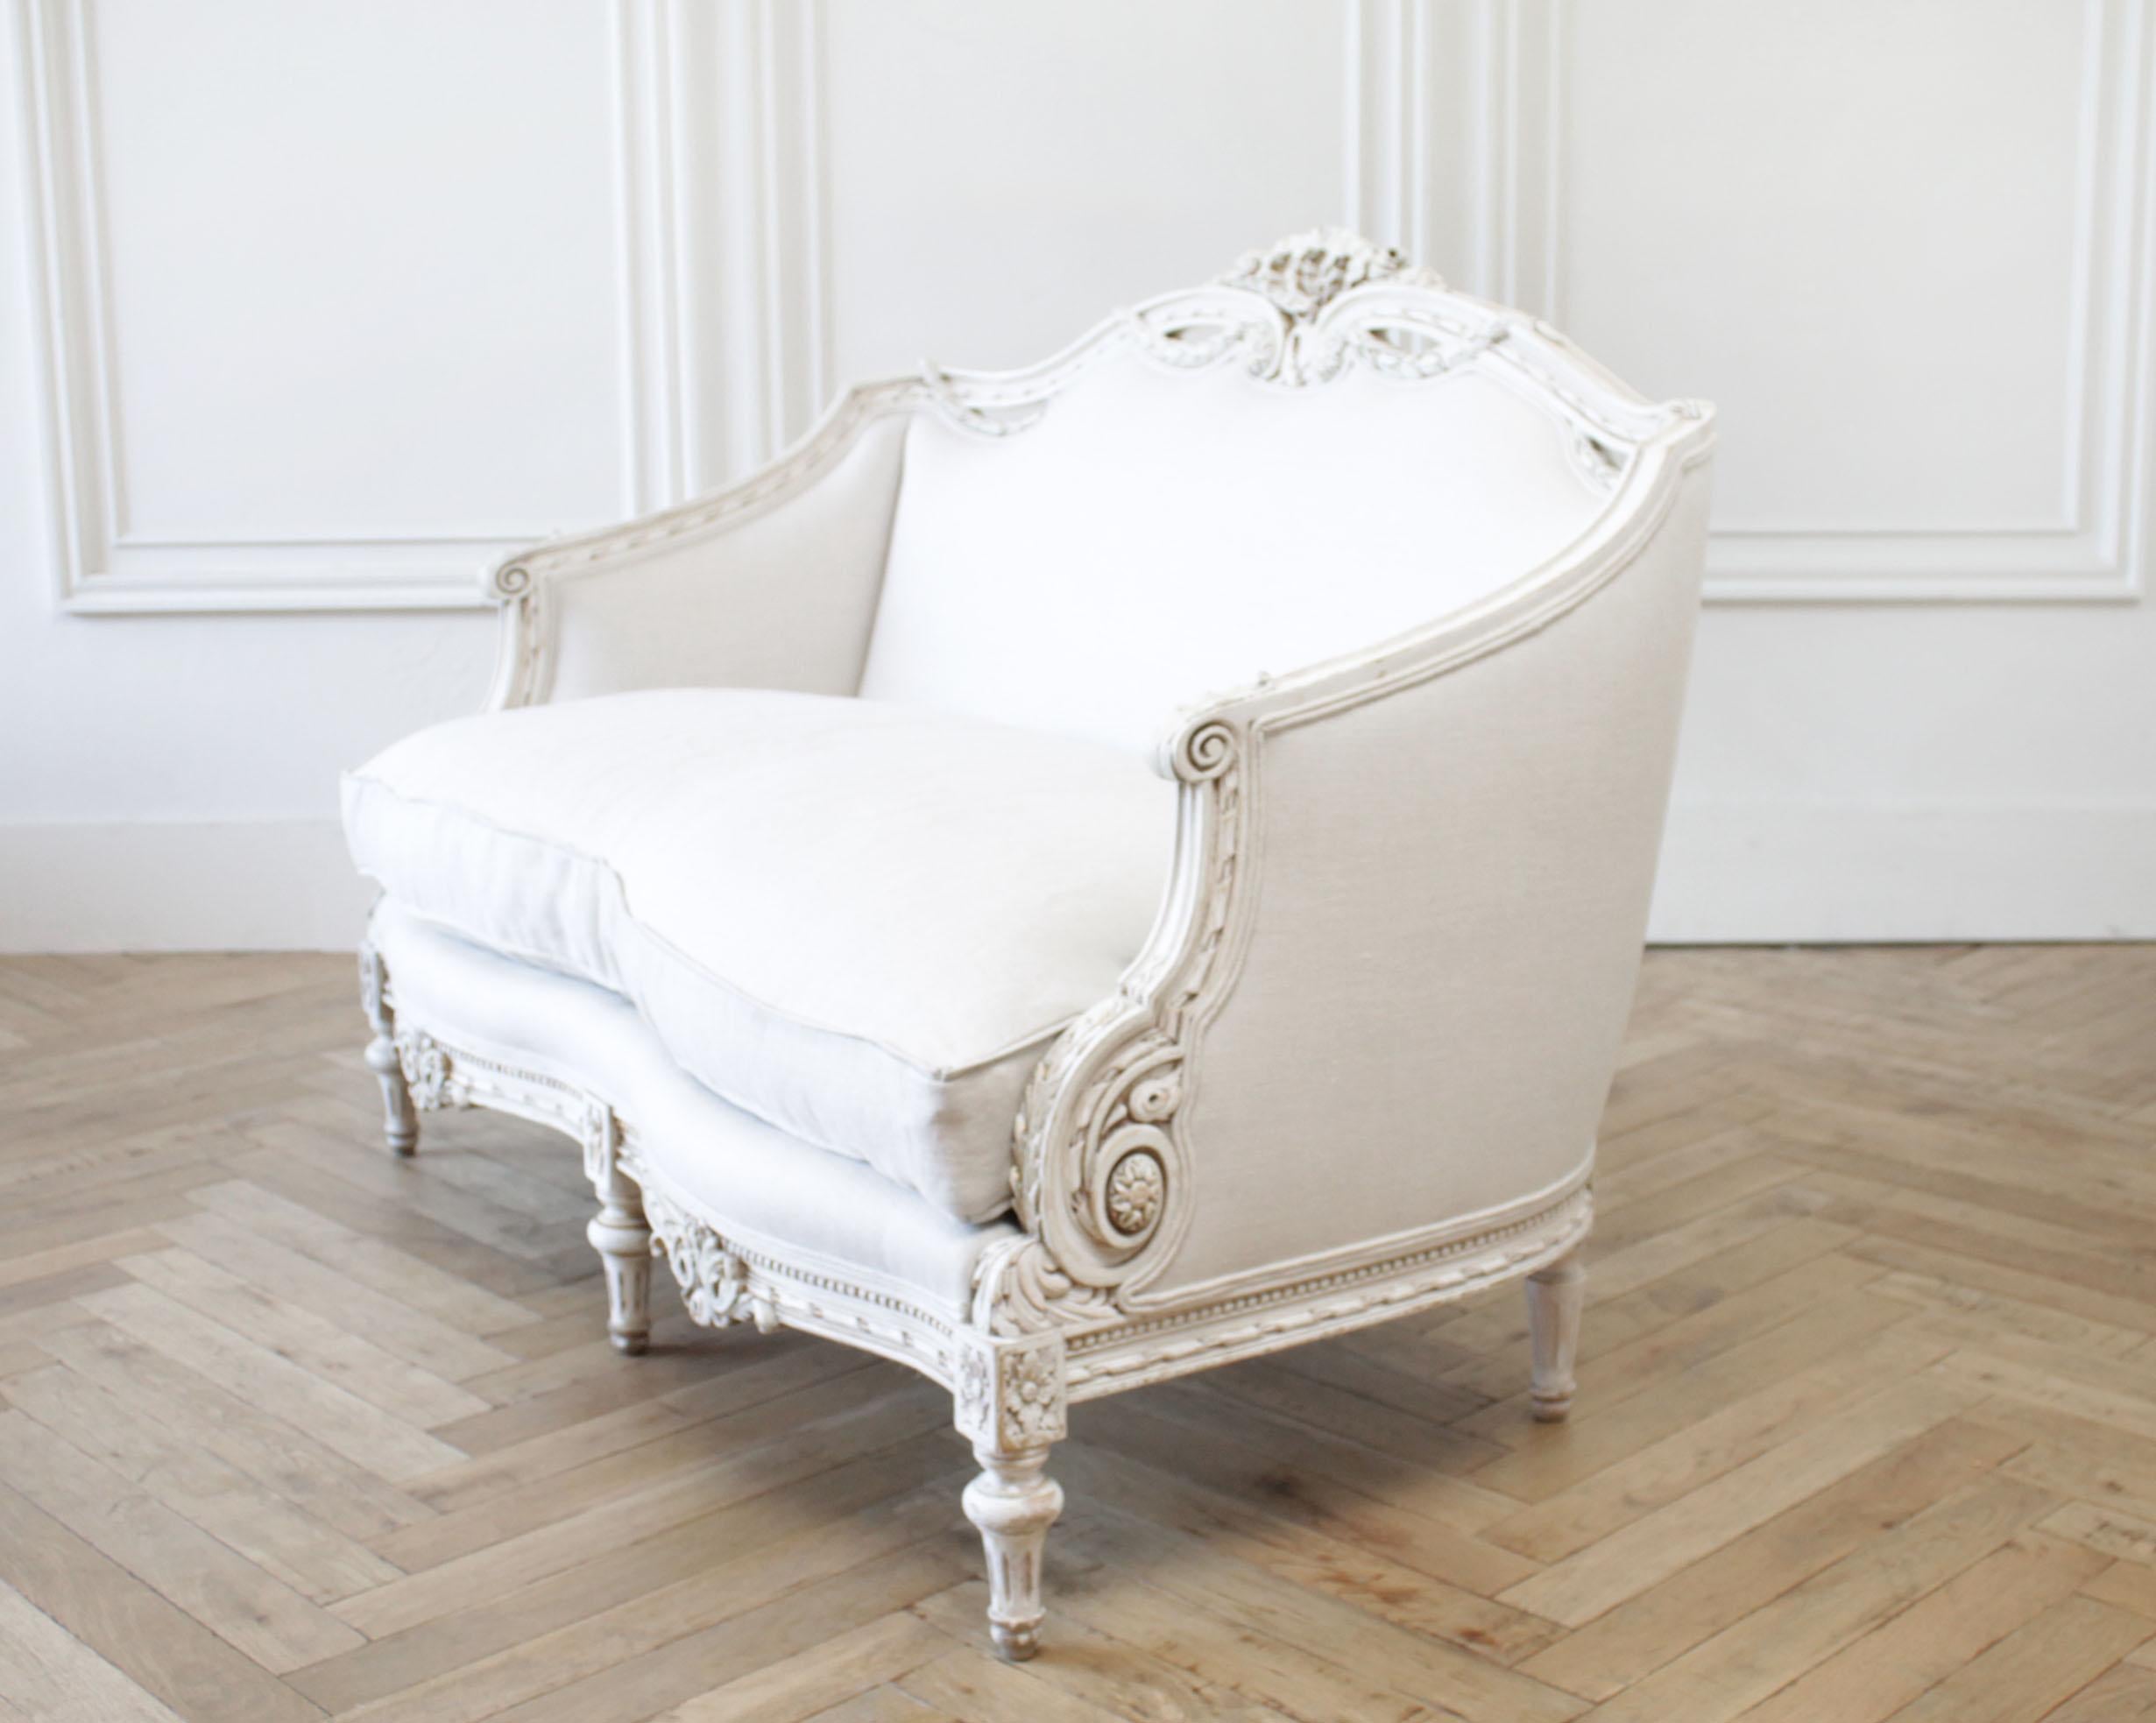 20th century painted carved Louis XVI style settee upholstered in Irish linen
Beautiful settee has an original painted finish that has been patina'd by our finisher to give a little more age and enhance the carvings. It is a creamy white color,